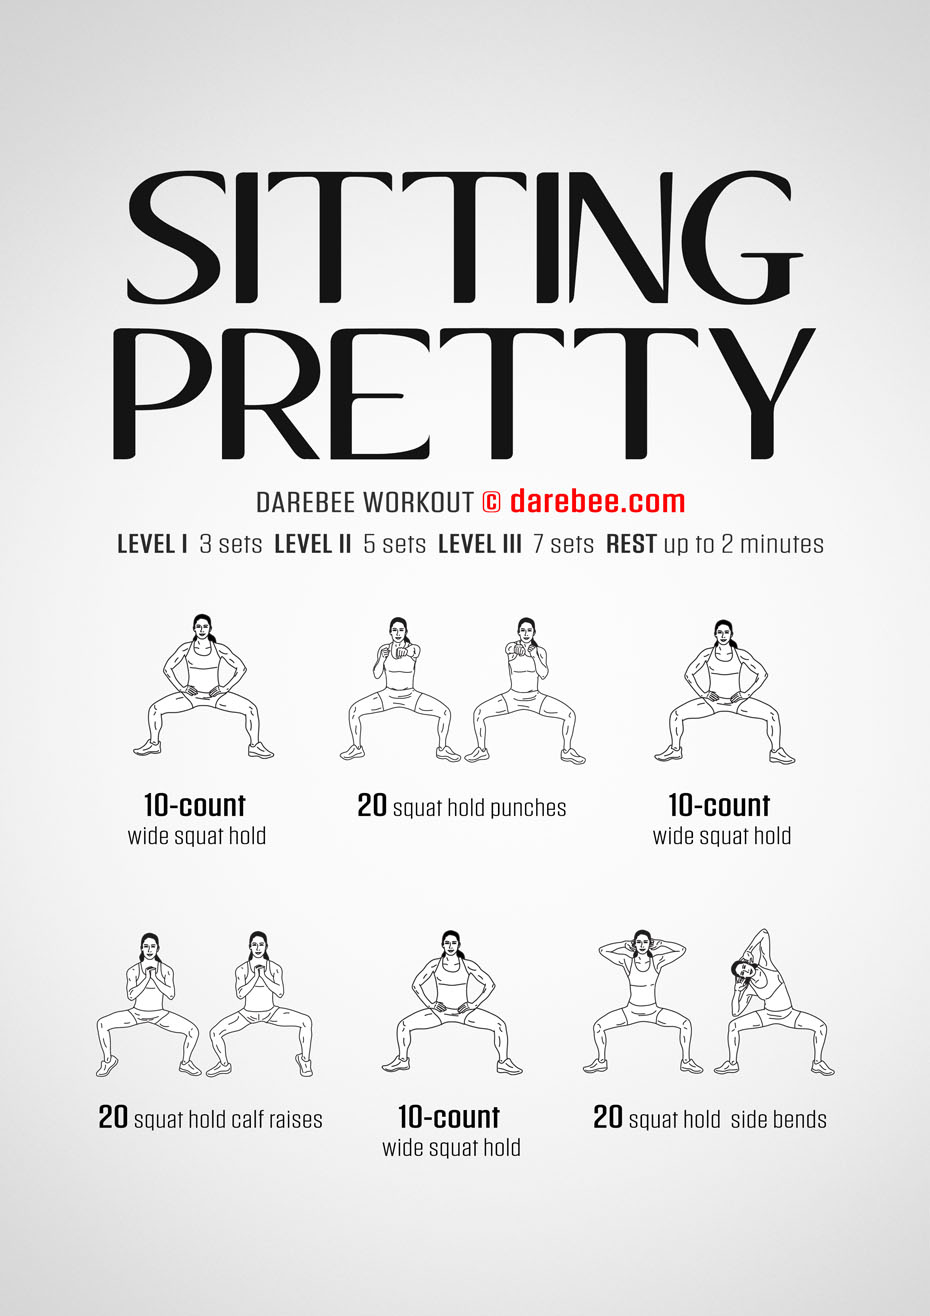 Sitting Pretty is a Darebee home-fitness martial arts based workout that works your lower body, arms and cardiovascular system.